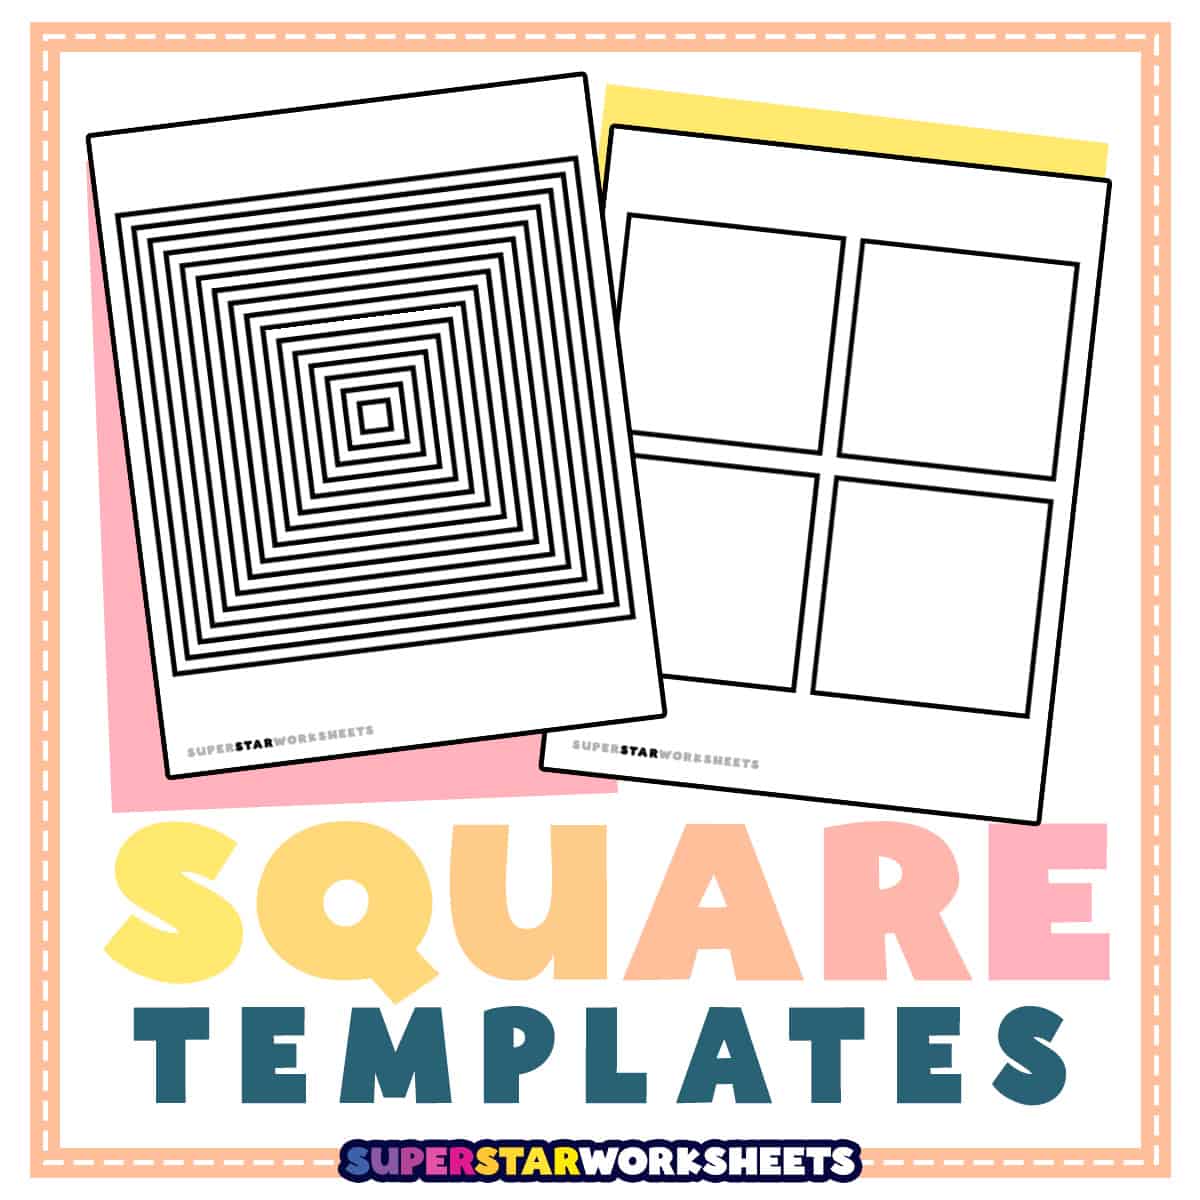 Square and Diagonal Graph Paper Template 